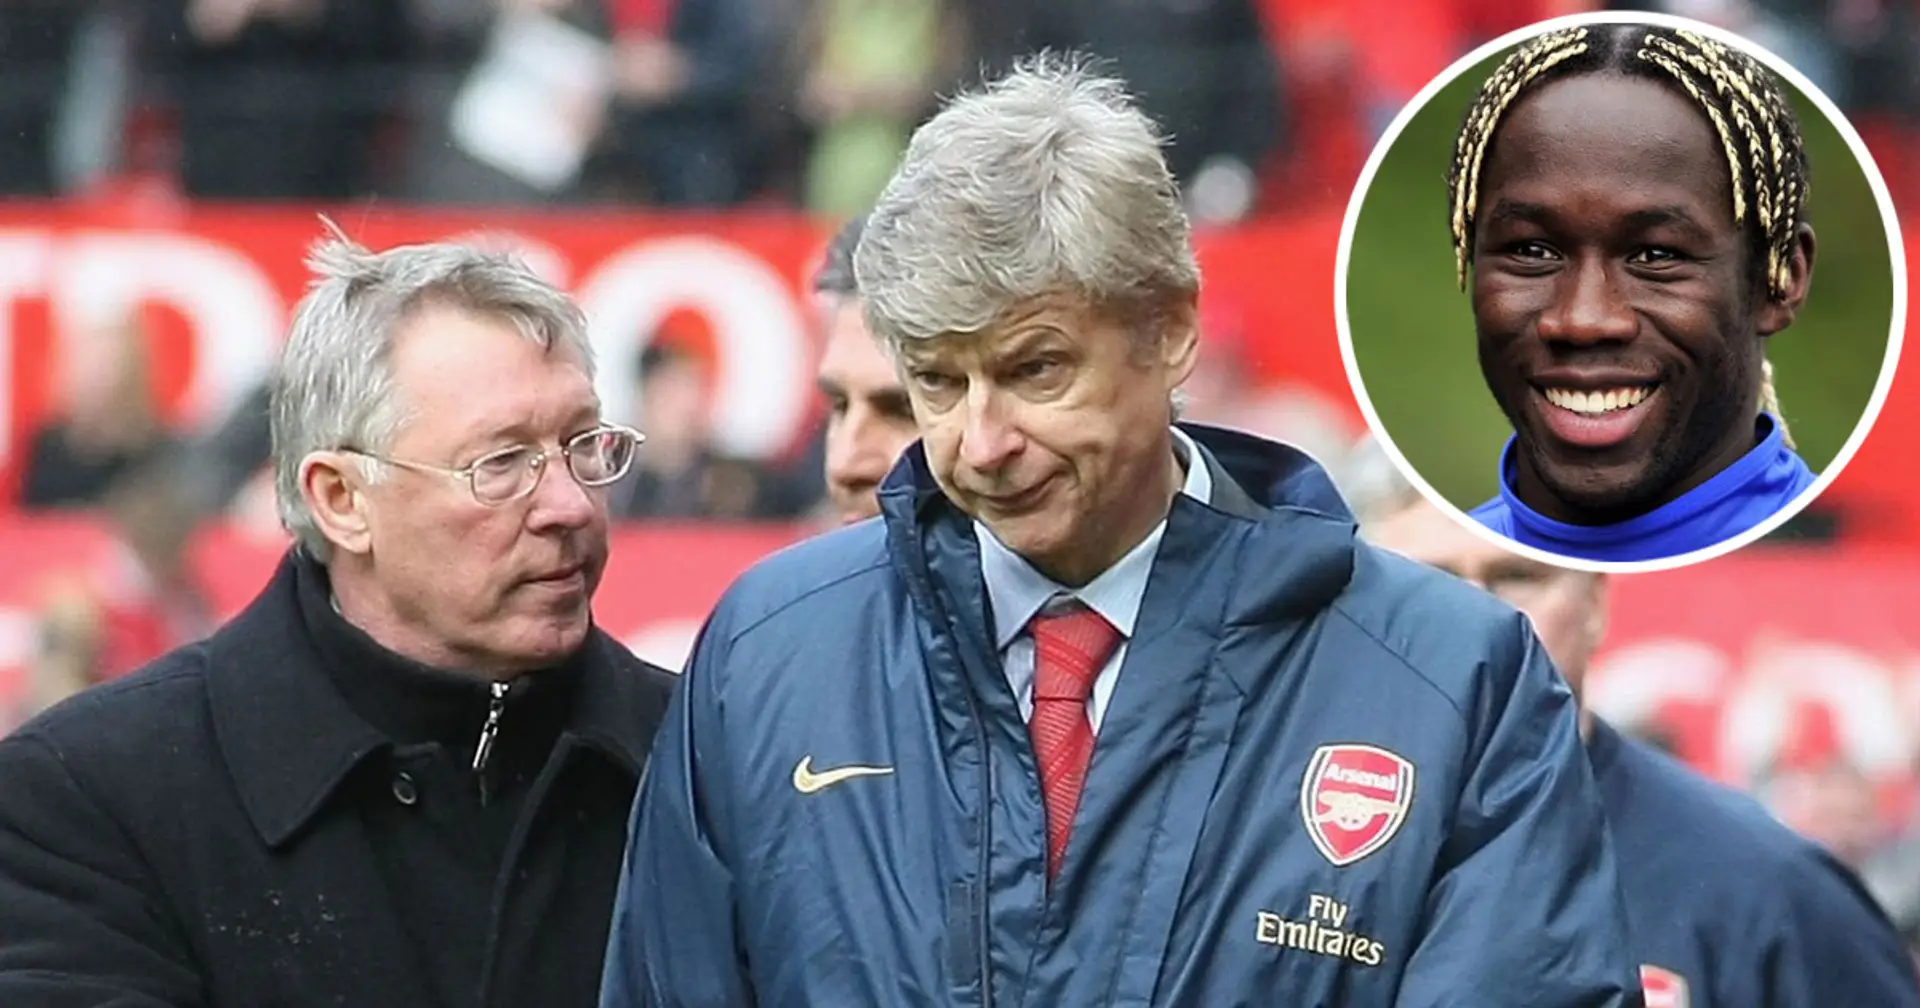 'Big mistake in life': Bacary Sagna explains why Arsenal lost title race in 2010-11 season